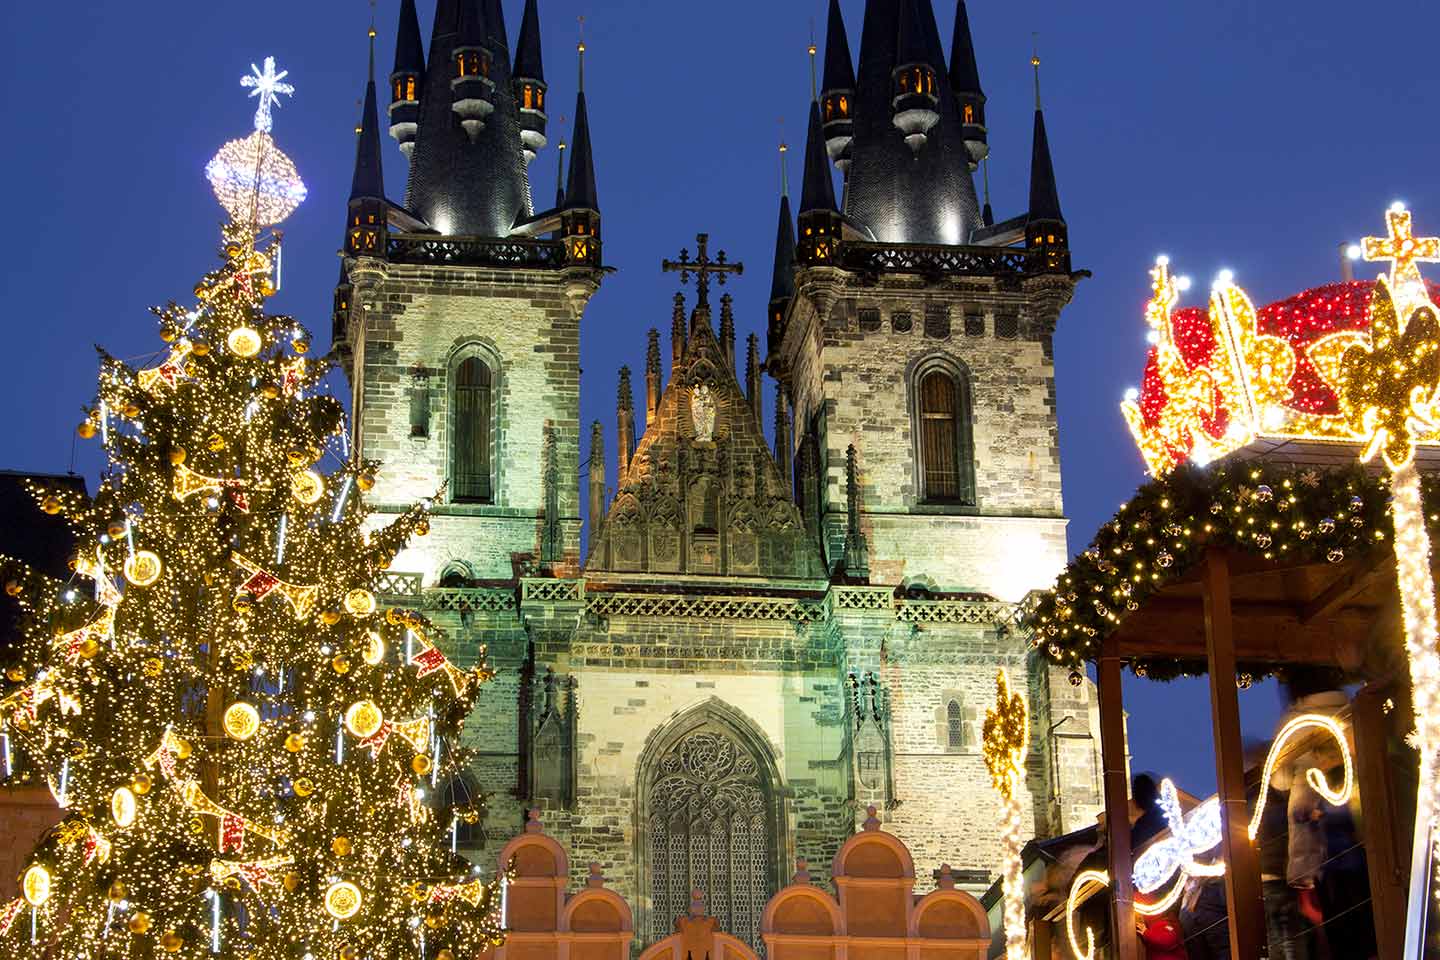 Image of The Church of Our Lady Before Týn and Prague Christmas Market